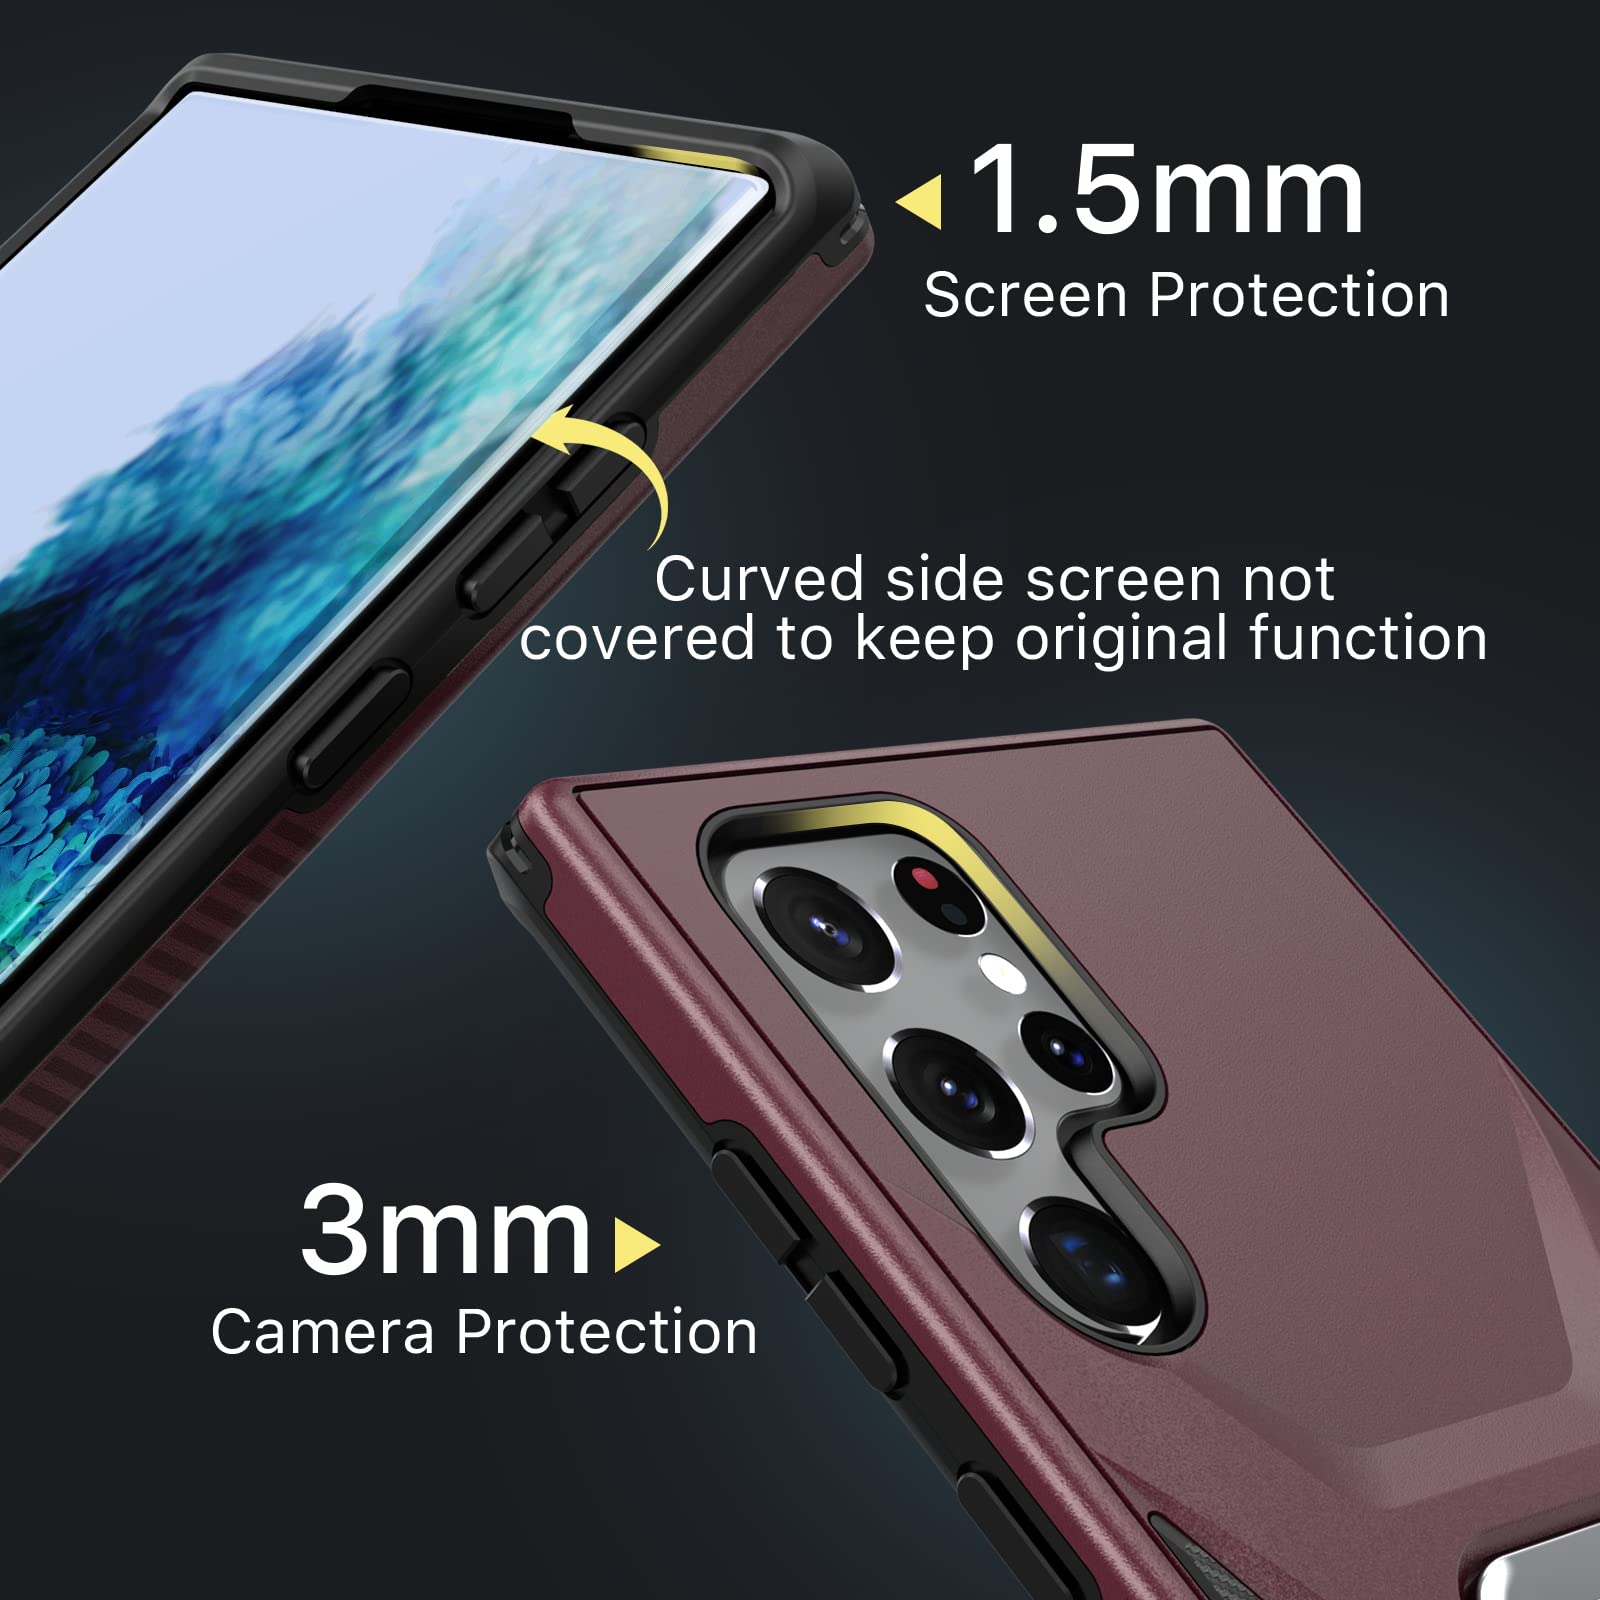 MYBAT Pro Shockproof Stealth Series Case for Samsung Galaxy S22 Ultra Case with Stand 6.8 inch, Support Magnetic Car Mount, Heavy Duty Military Grade Drop Protective Case with Kickstand - Plum